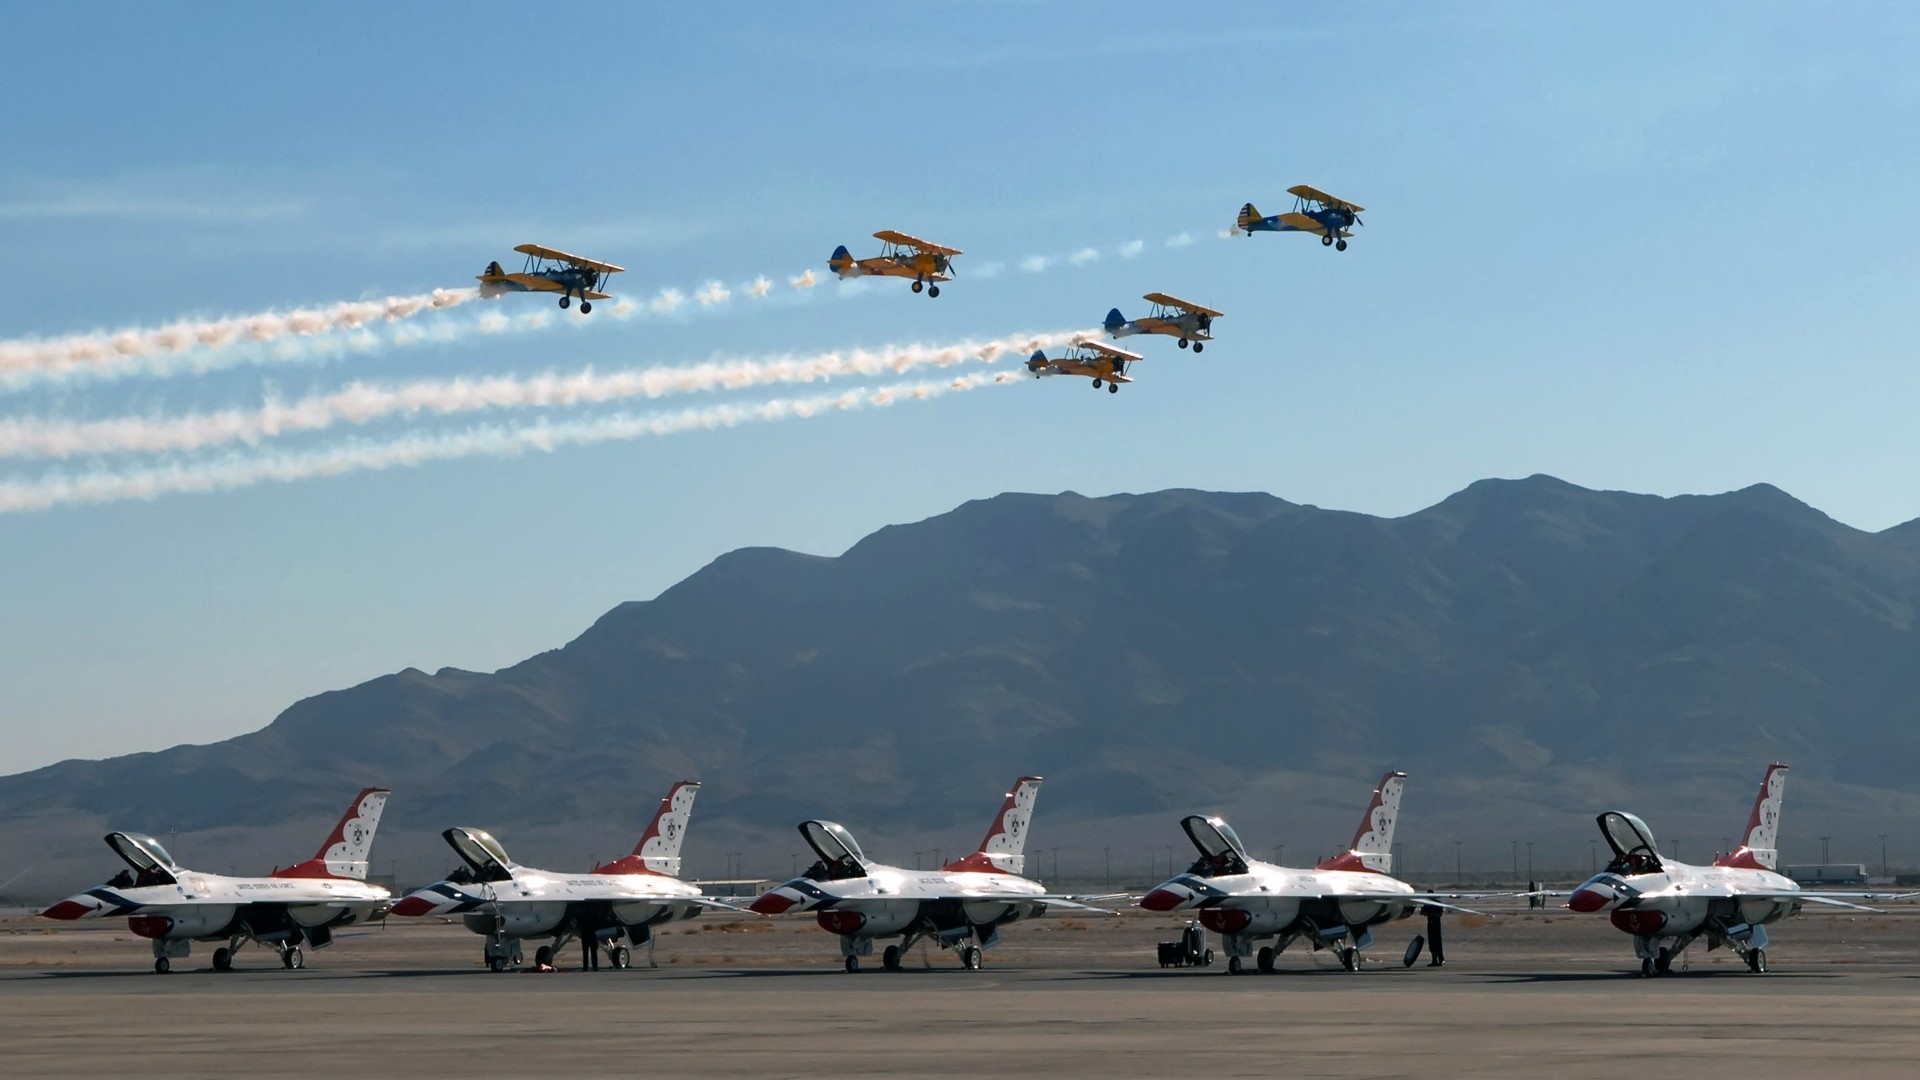 General 1920x1080 military aircraft airplane sky jets General Dynamics F-16 Fighting Falcon contrails military aircraft military vehicle vehicle US Air Force thunderbirds smoke aerobatic team biplane airshows